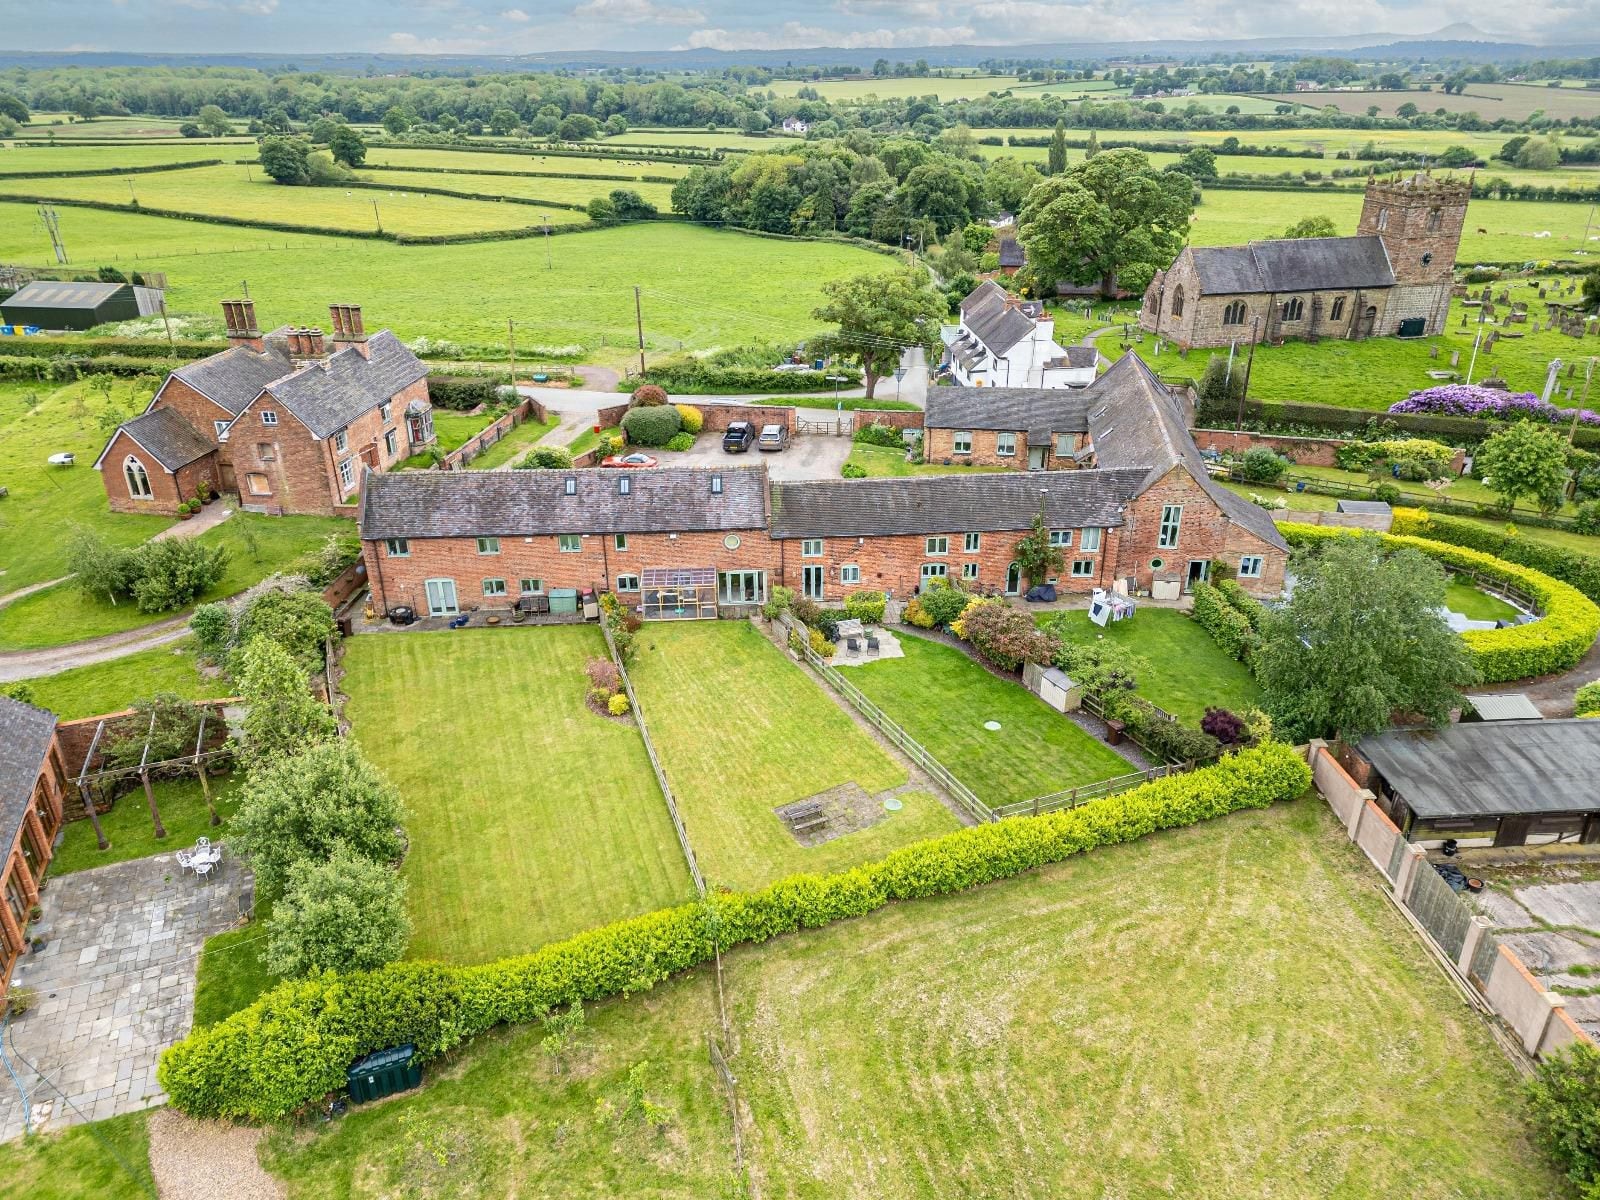 House with stunning views ideal for escaping 'hustle and bustle' put up for sale